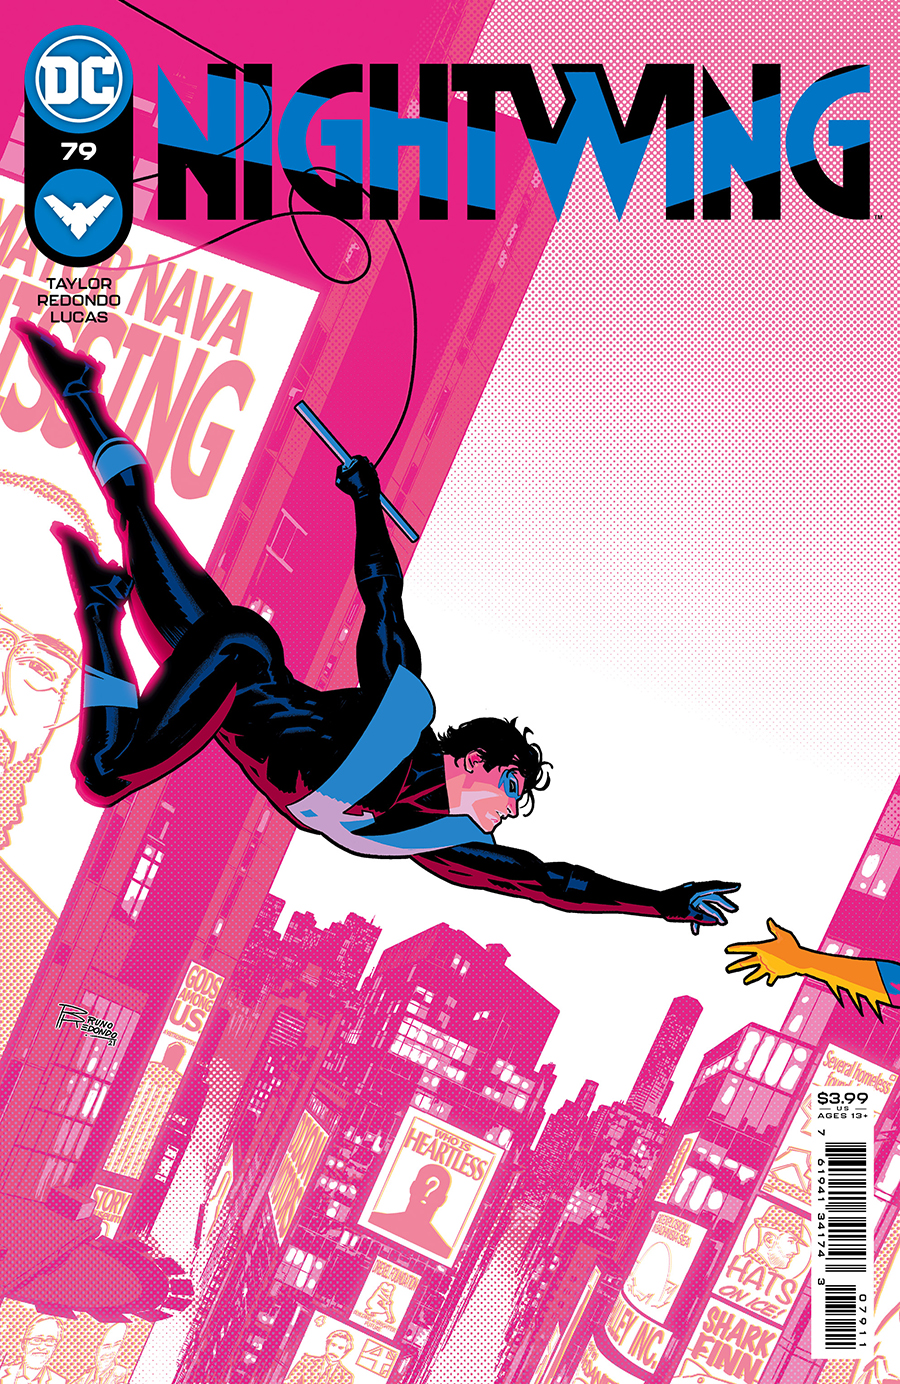 Nightwing Vol 4 #79 Cover A